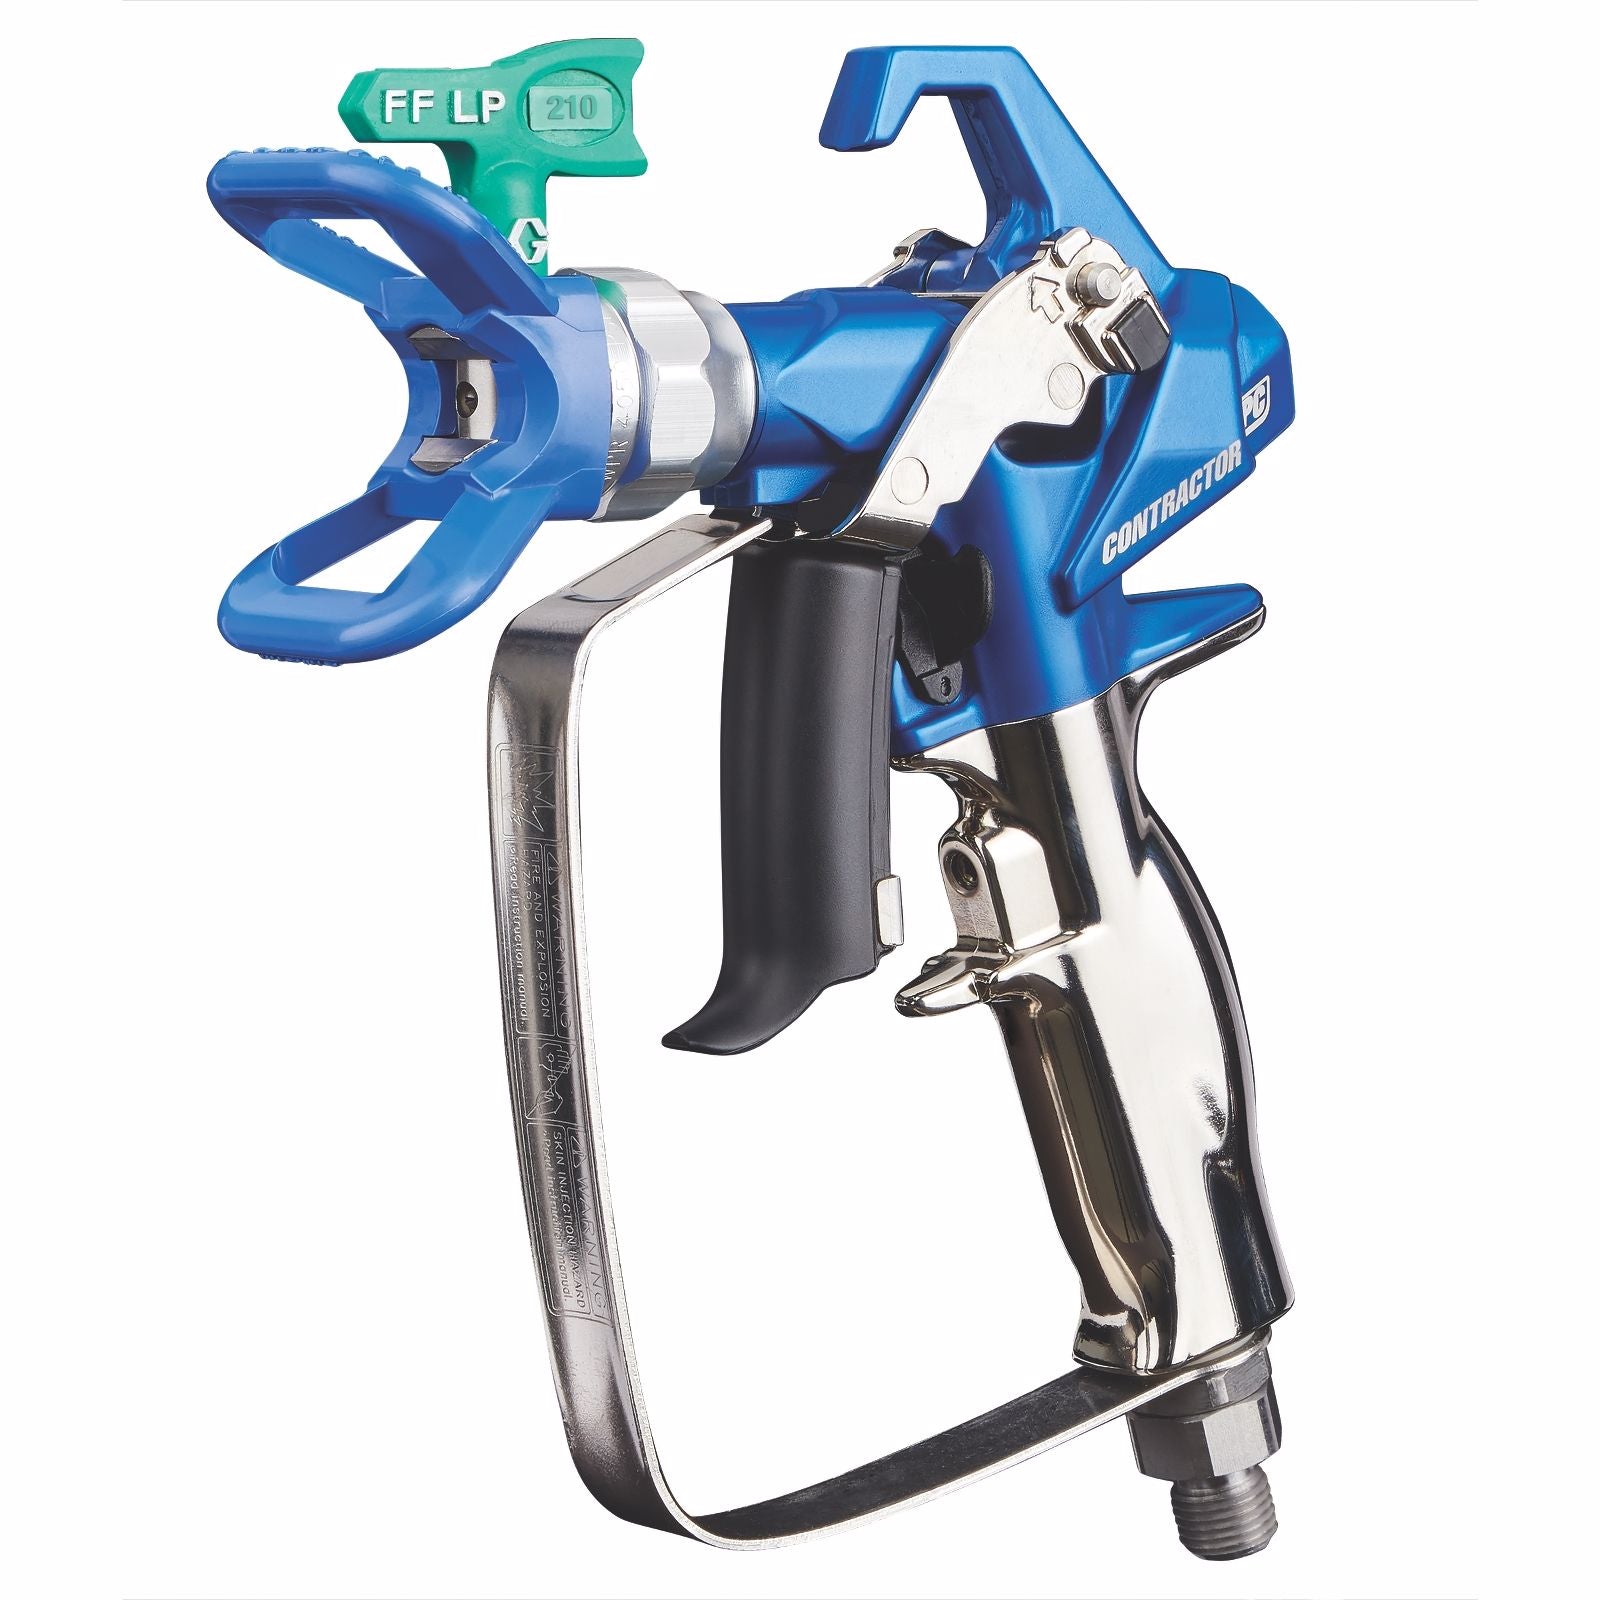 Graco 17Y470 Contractor PC Light Weight Airless Spray Gun with RAC X FFLP 210 SwitchTip - The Paint People